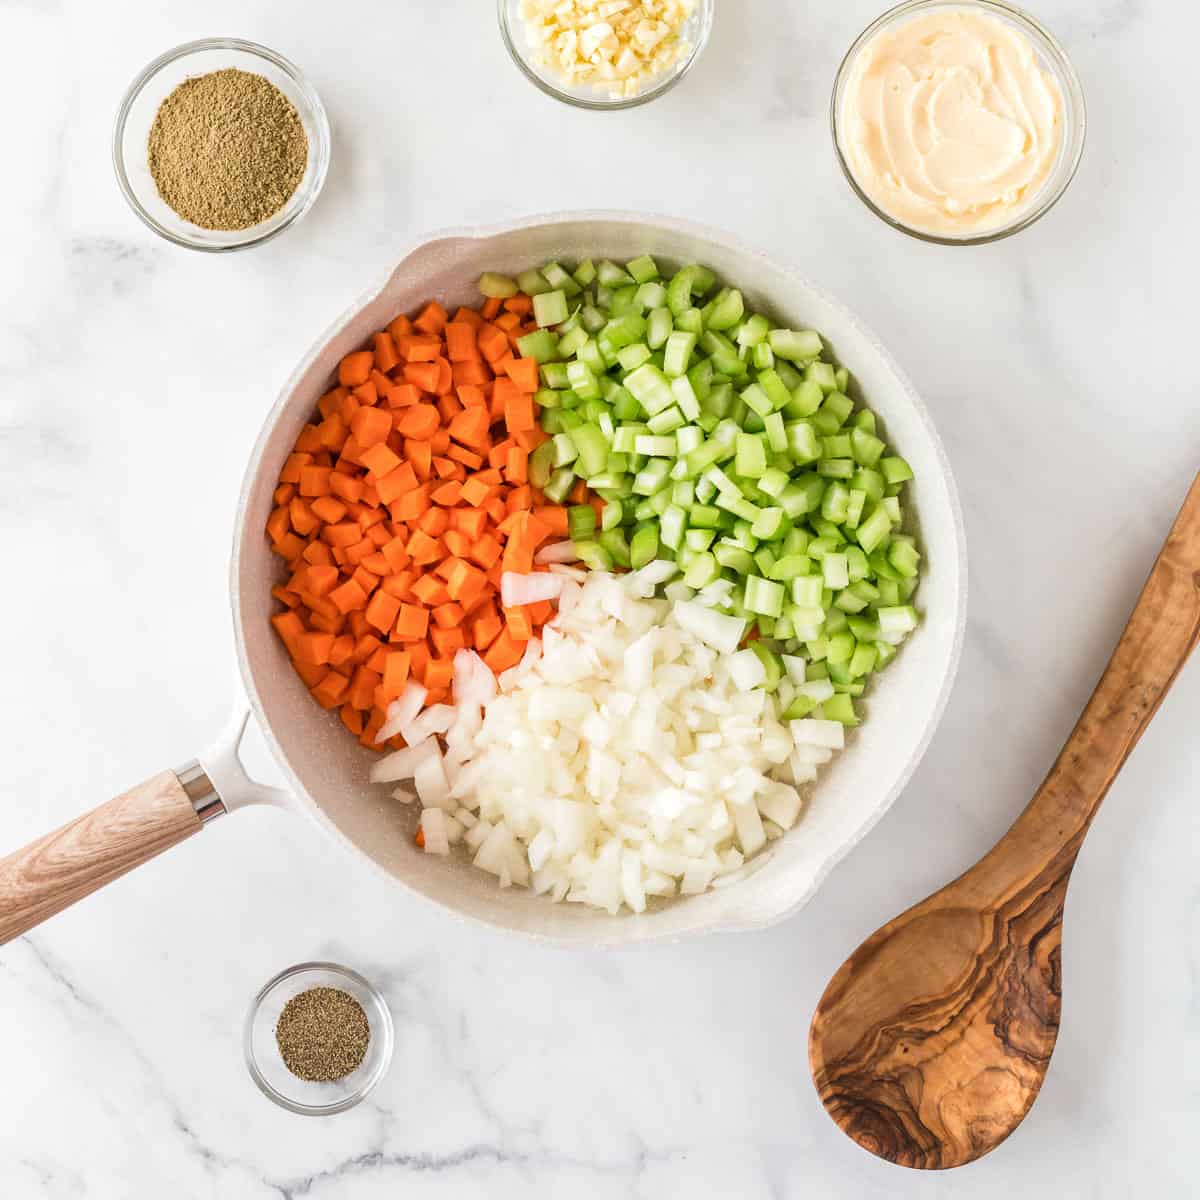 celery, carrots, and onion in a skillet